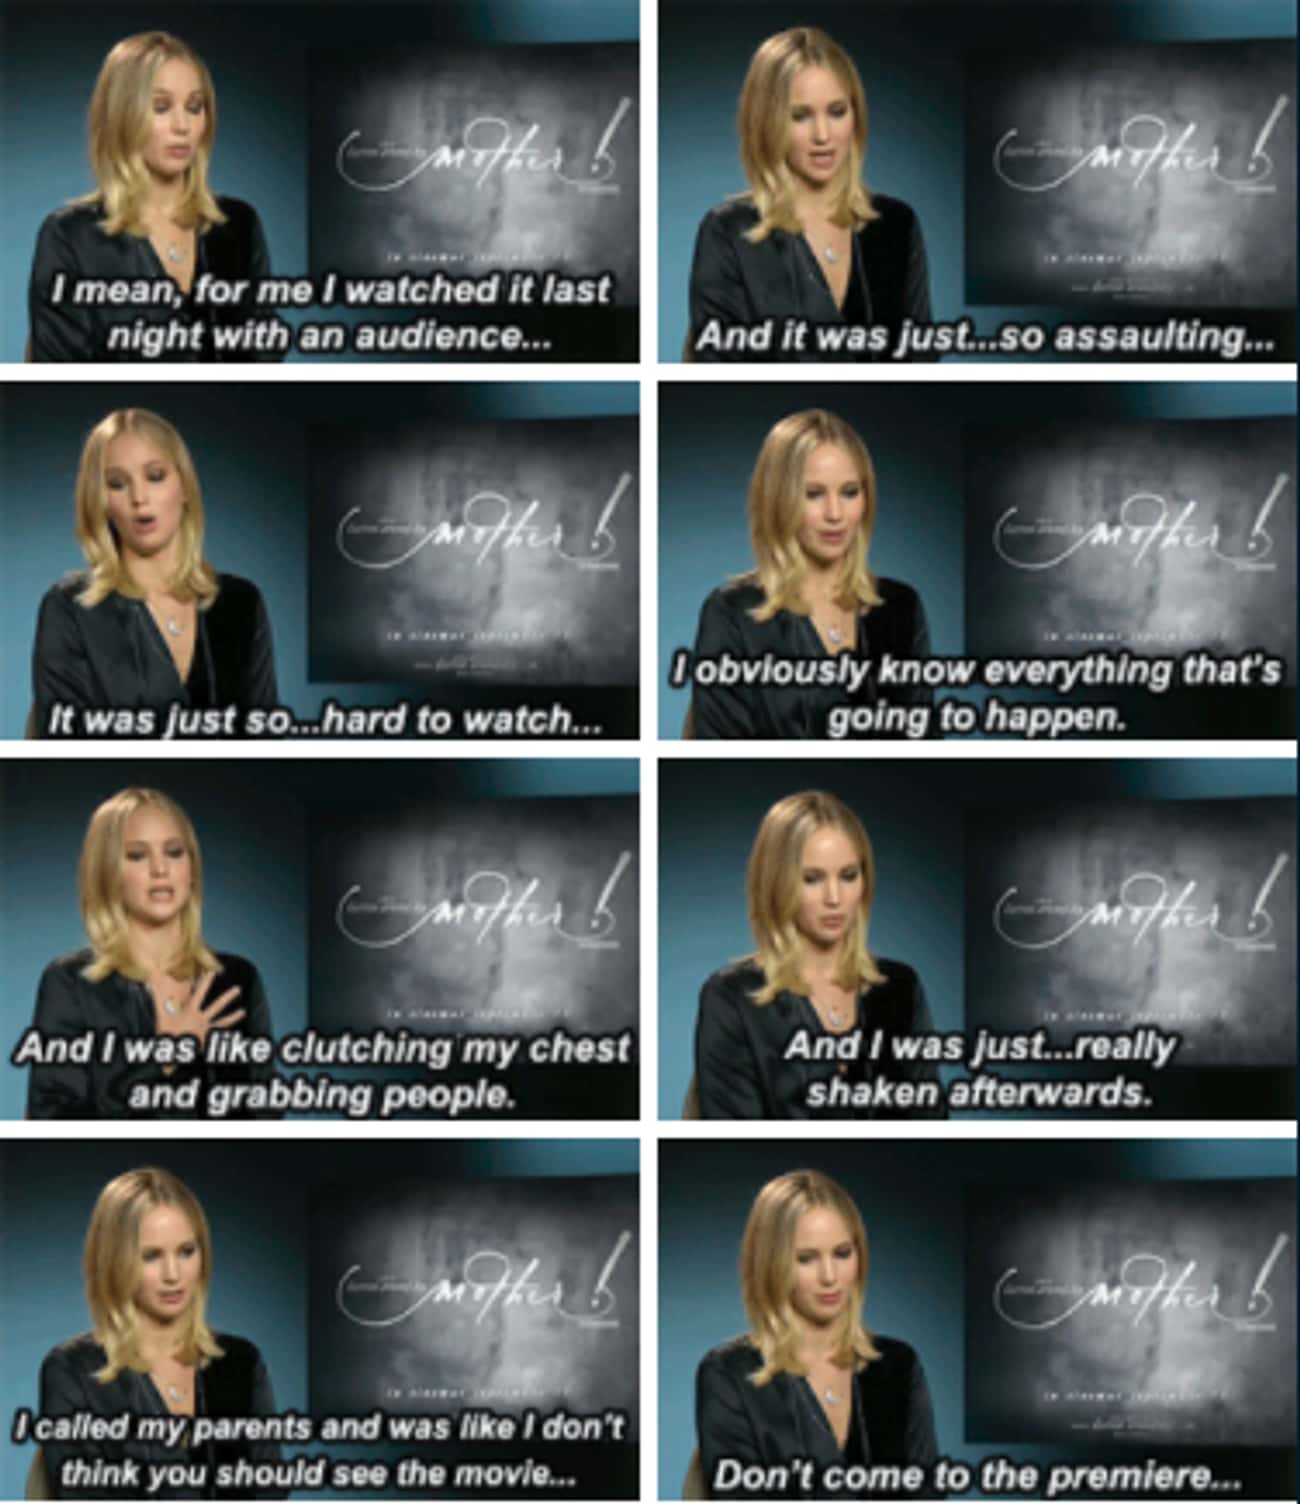 Jennifer Talked About Watching The Premiere Of 'Mother'